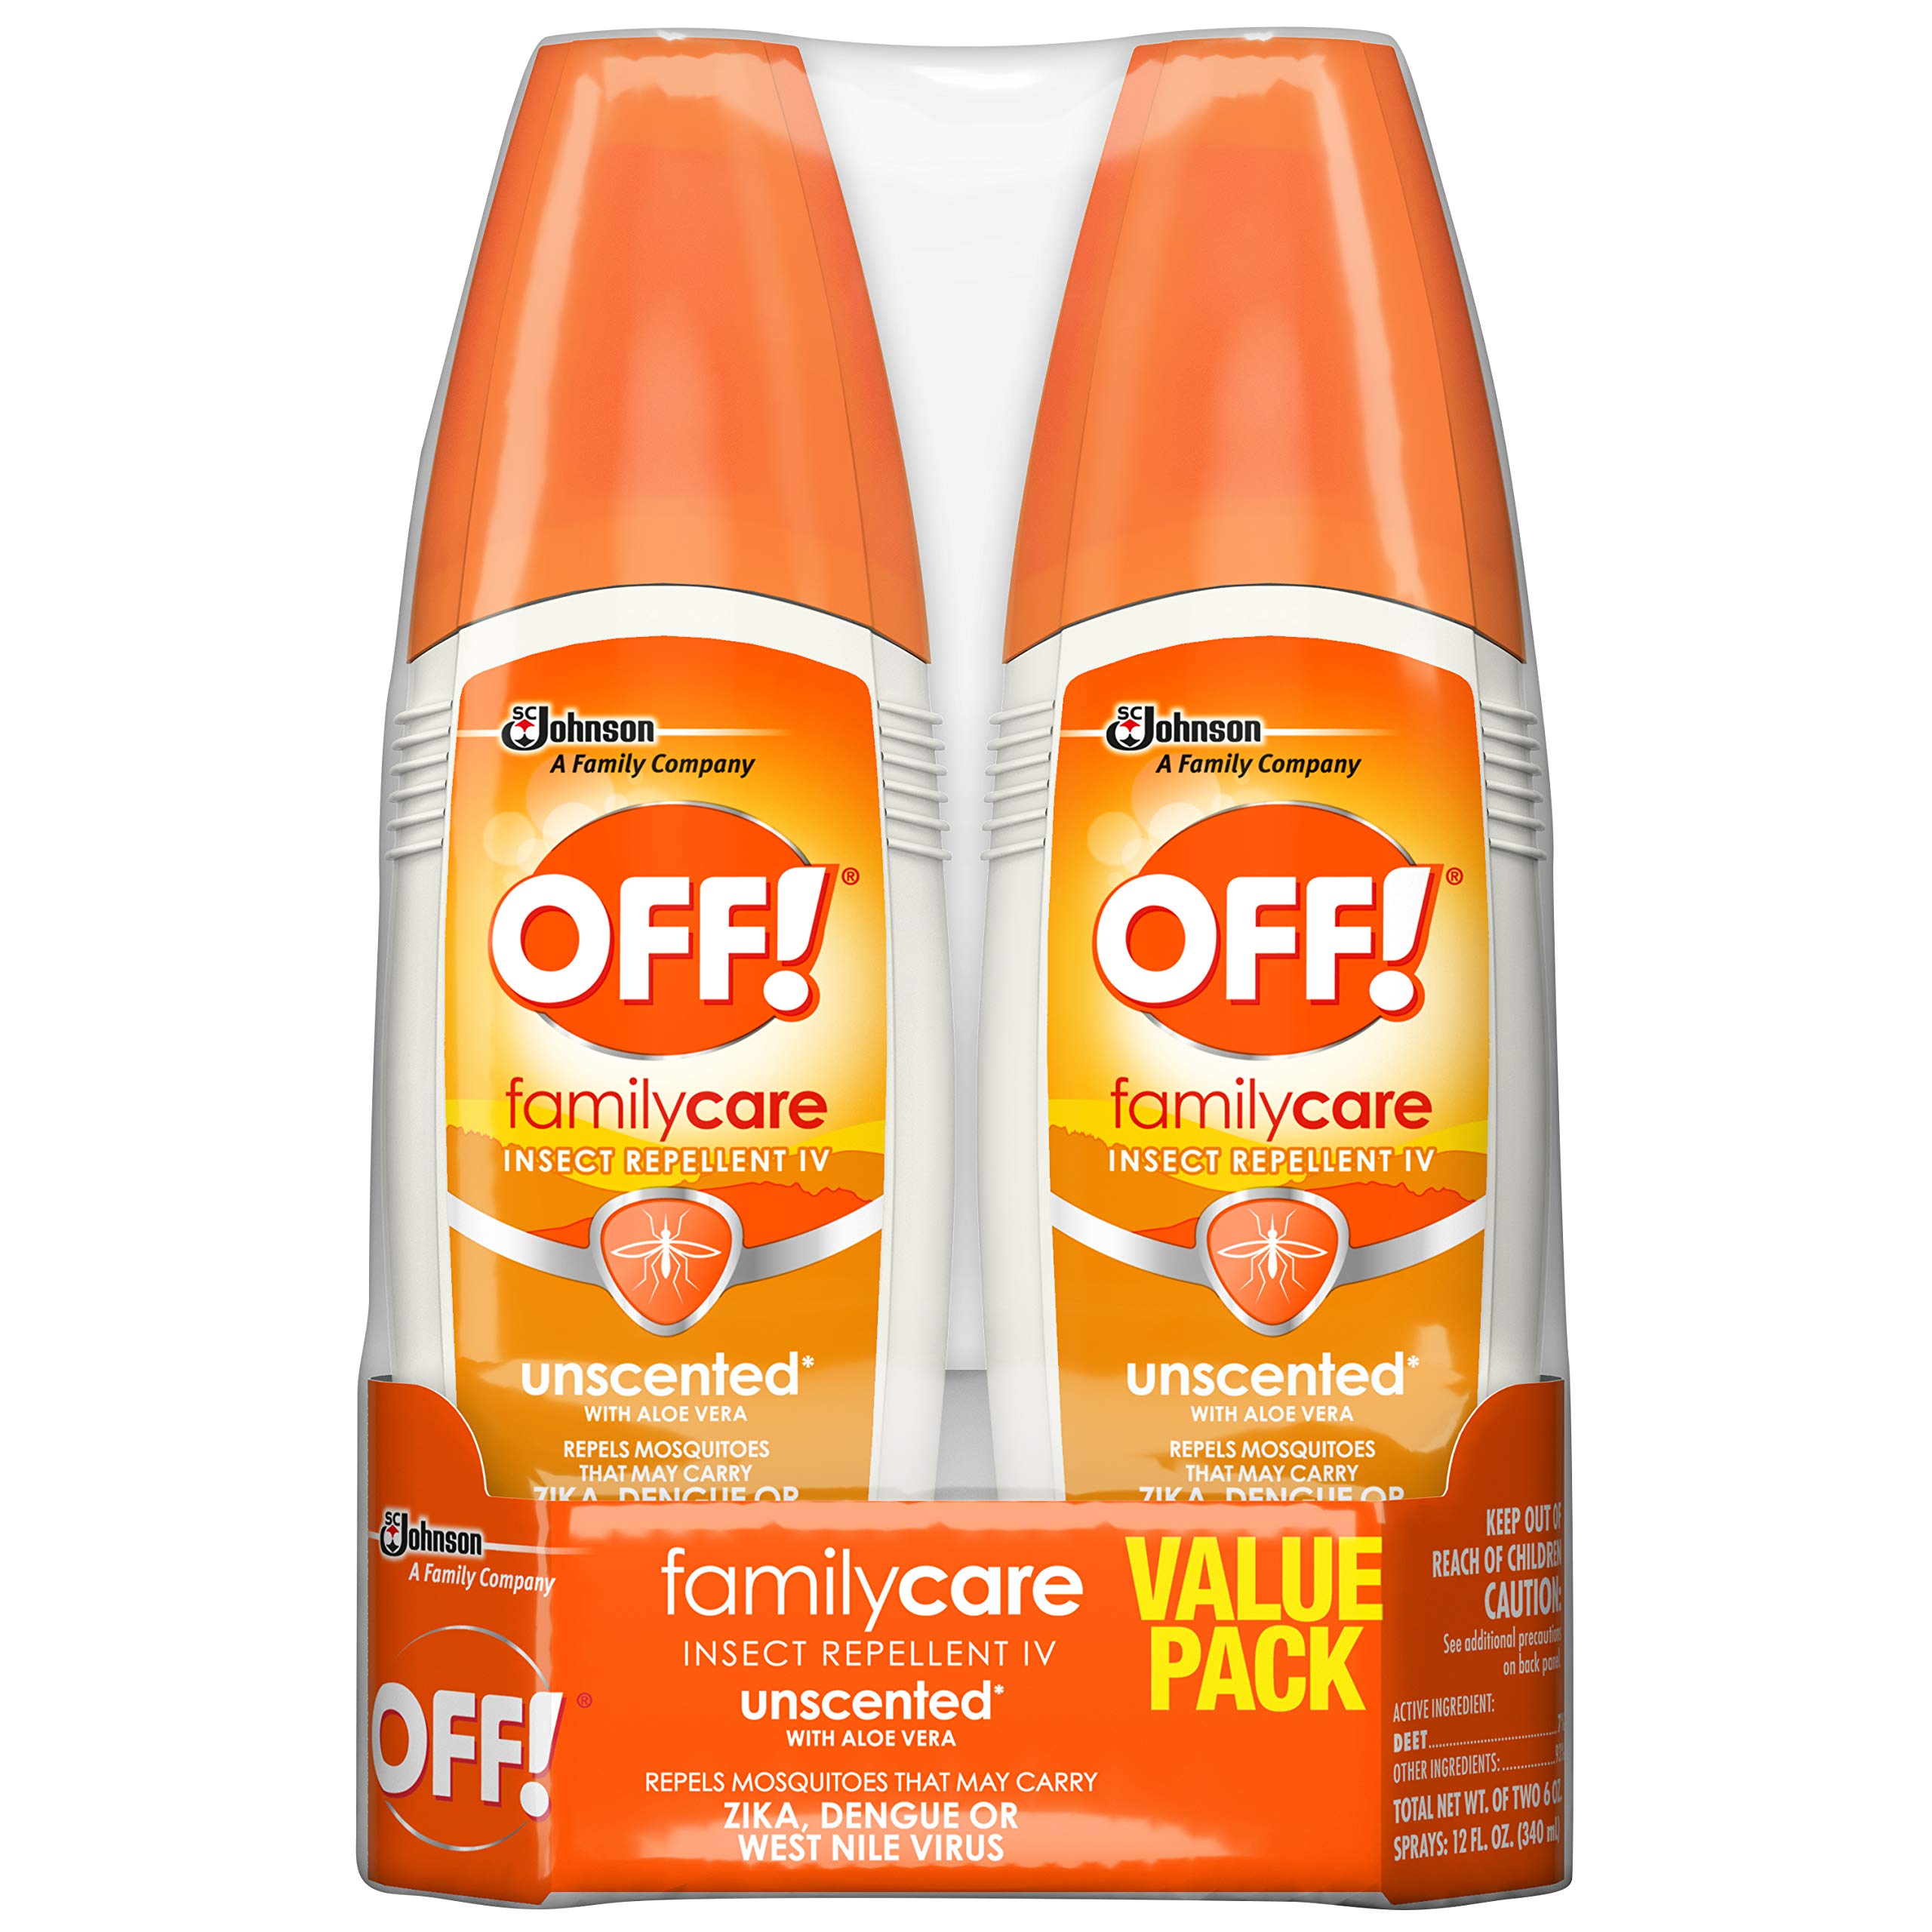 OFF! FamilyCare Insect & Mosquito Repellent Spritz, Unscented Bug spray with Aloe-Vera, 7% Deet, 6 oz (Pack of 2)